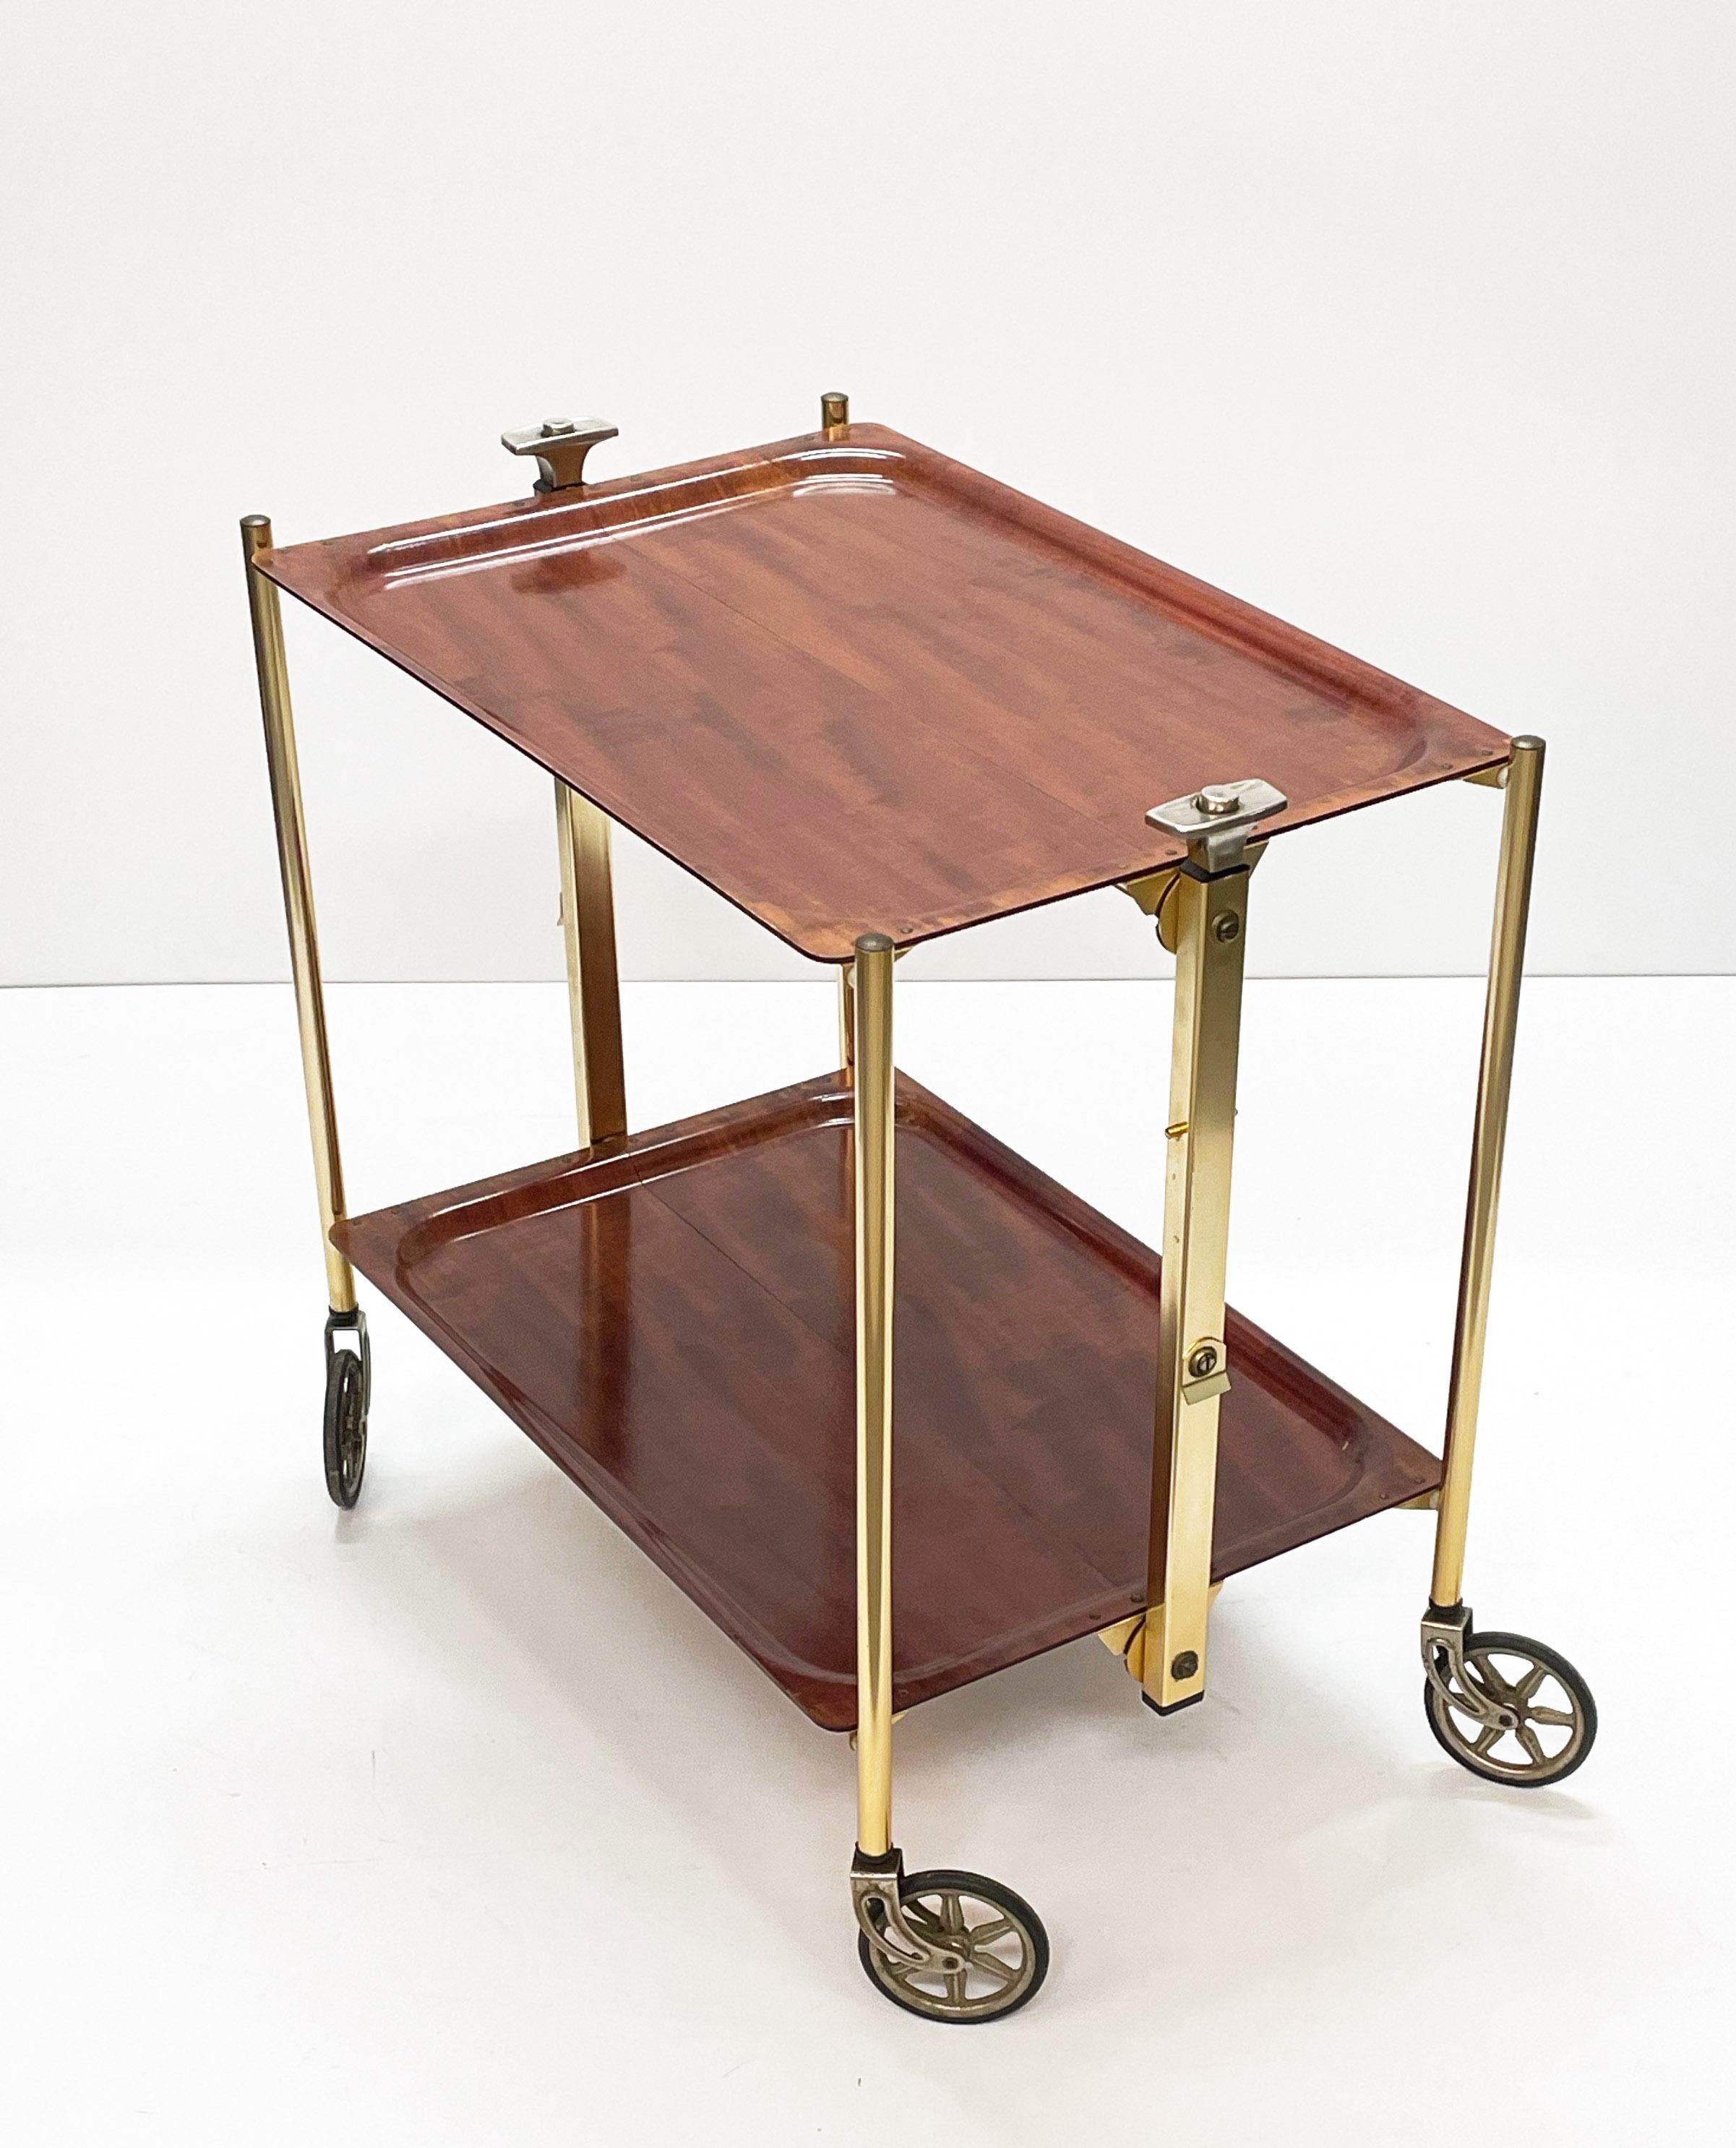 Food trolley in wood effect laminate and golden aluminium. This midcentury foldable beverage trolley was produced in the 1950s. 

This service trolley can also be used as a side table, and it is in wonderful vintage conditions. This piece is unique